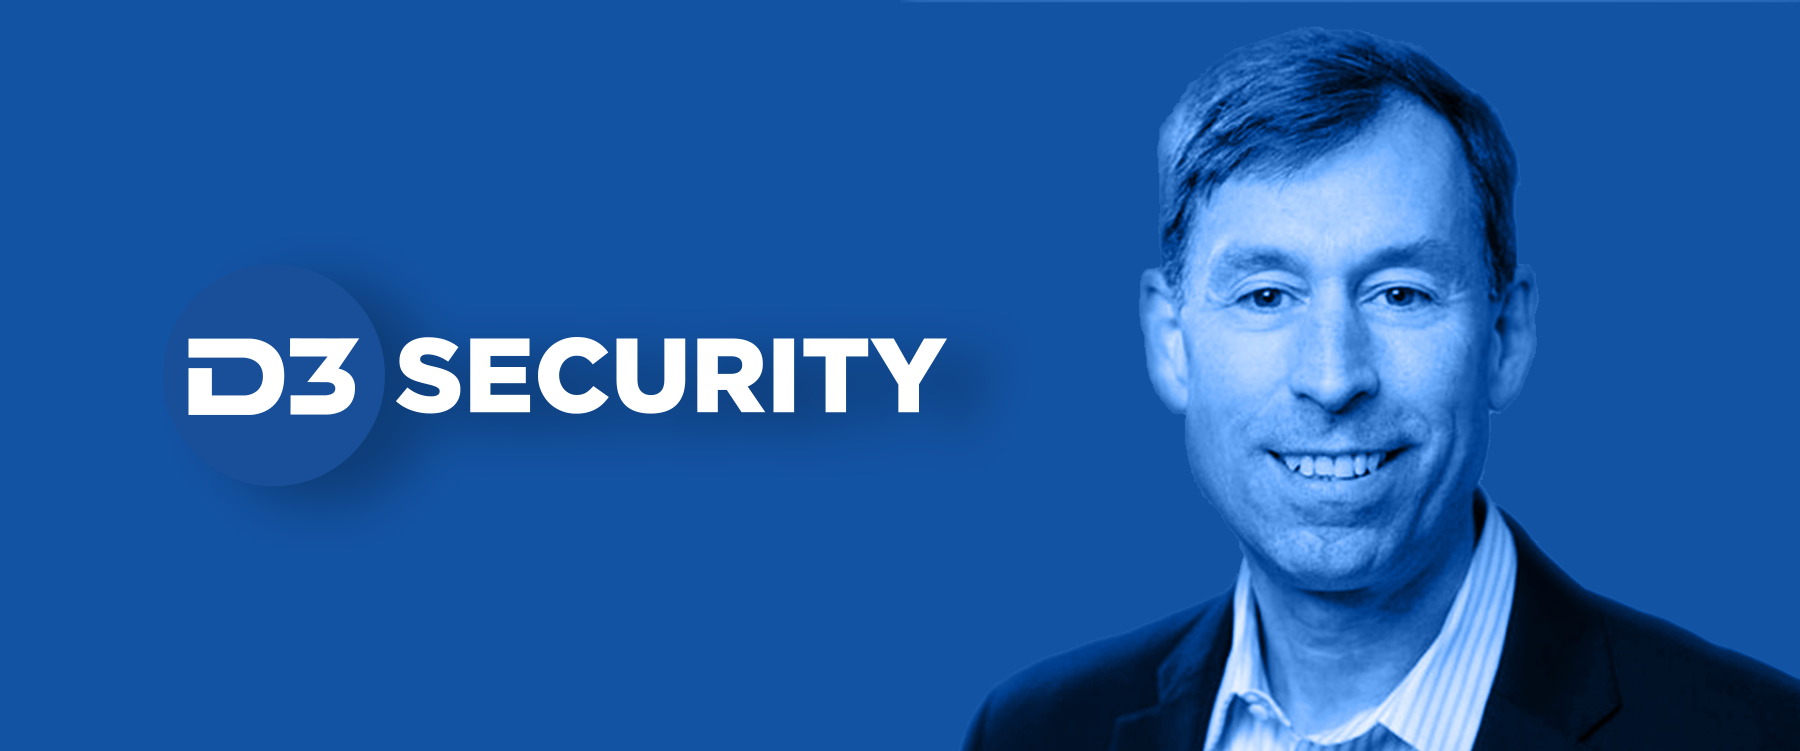 D3 Security Hires Cybersecurity Sales and Channel Leader Michael Lyons as CRO-post_thumbnail